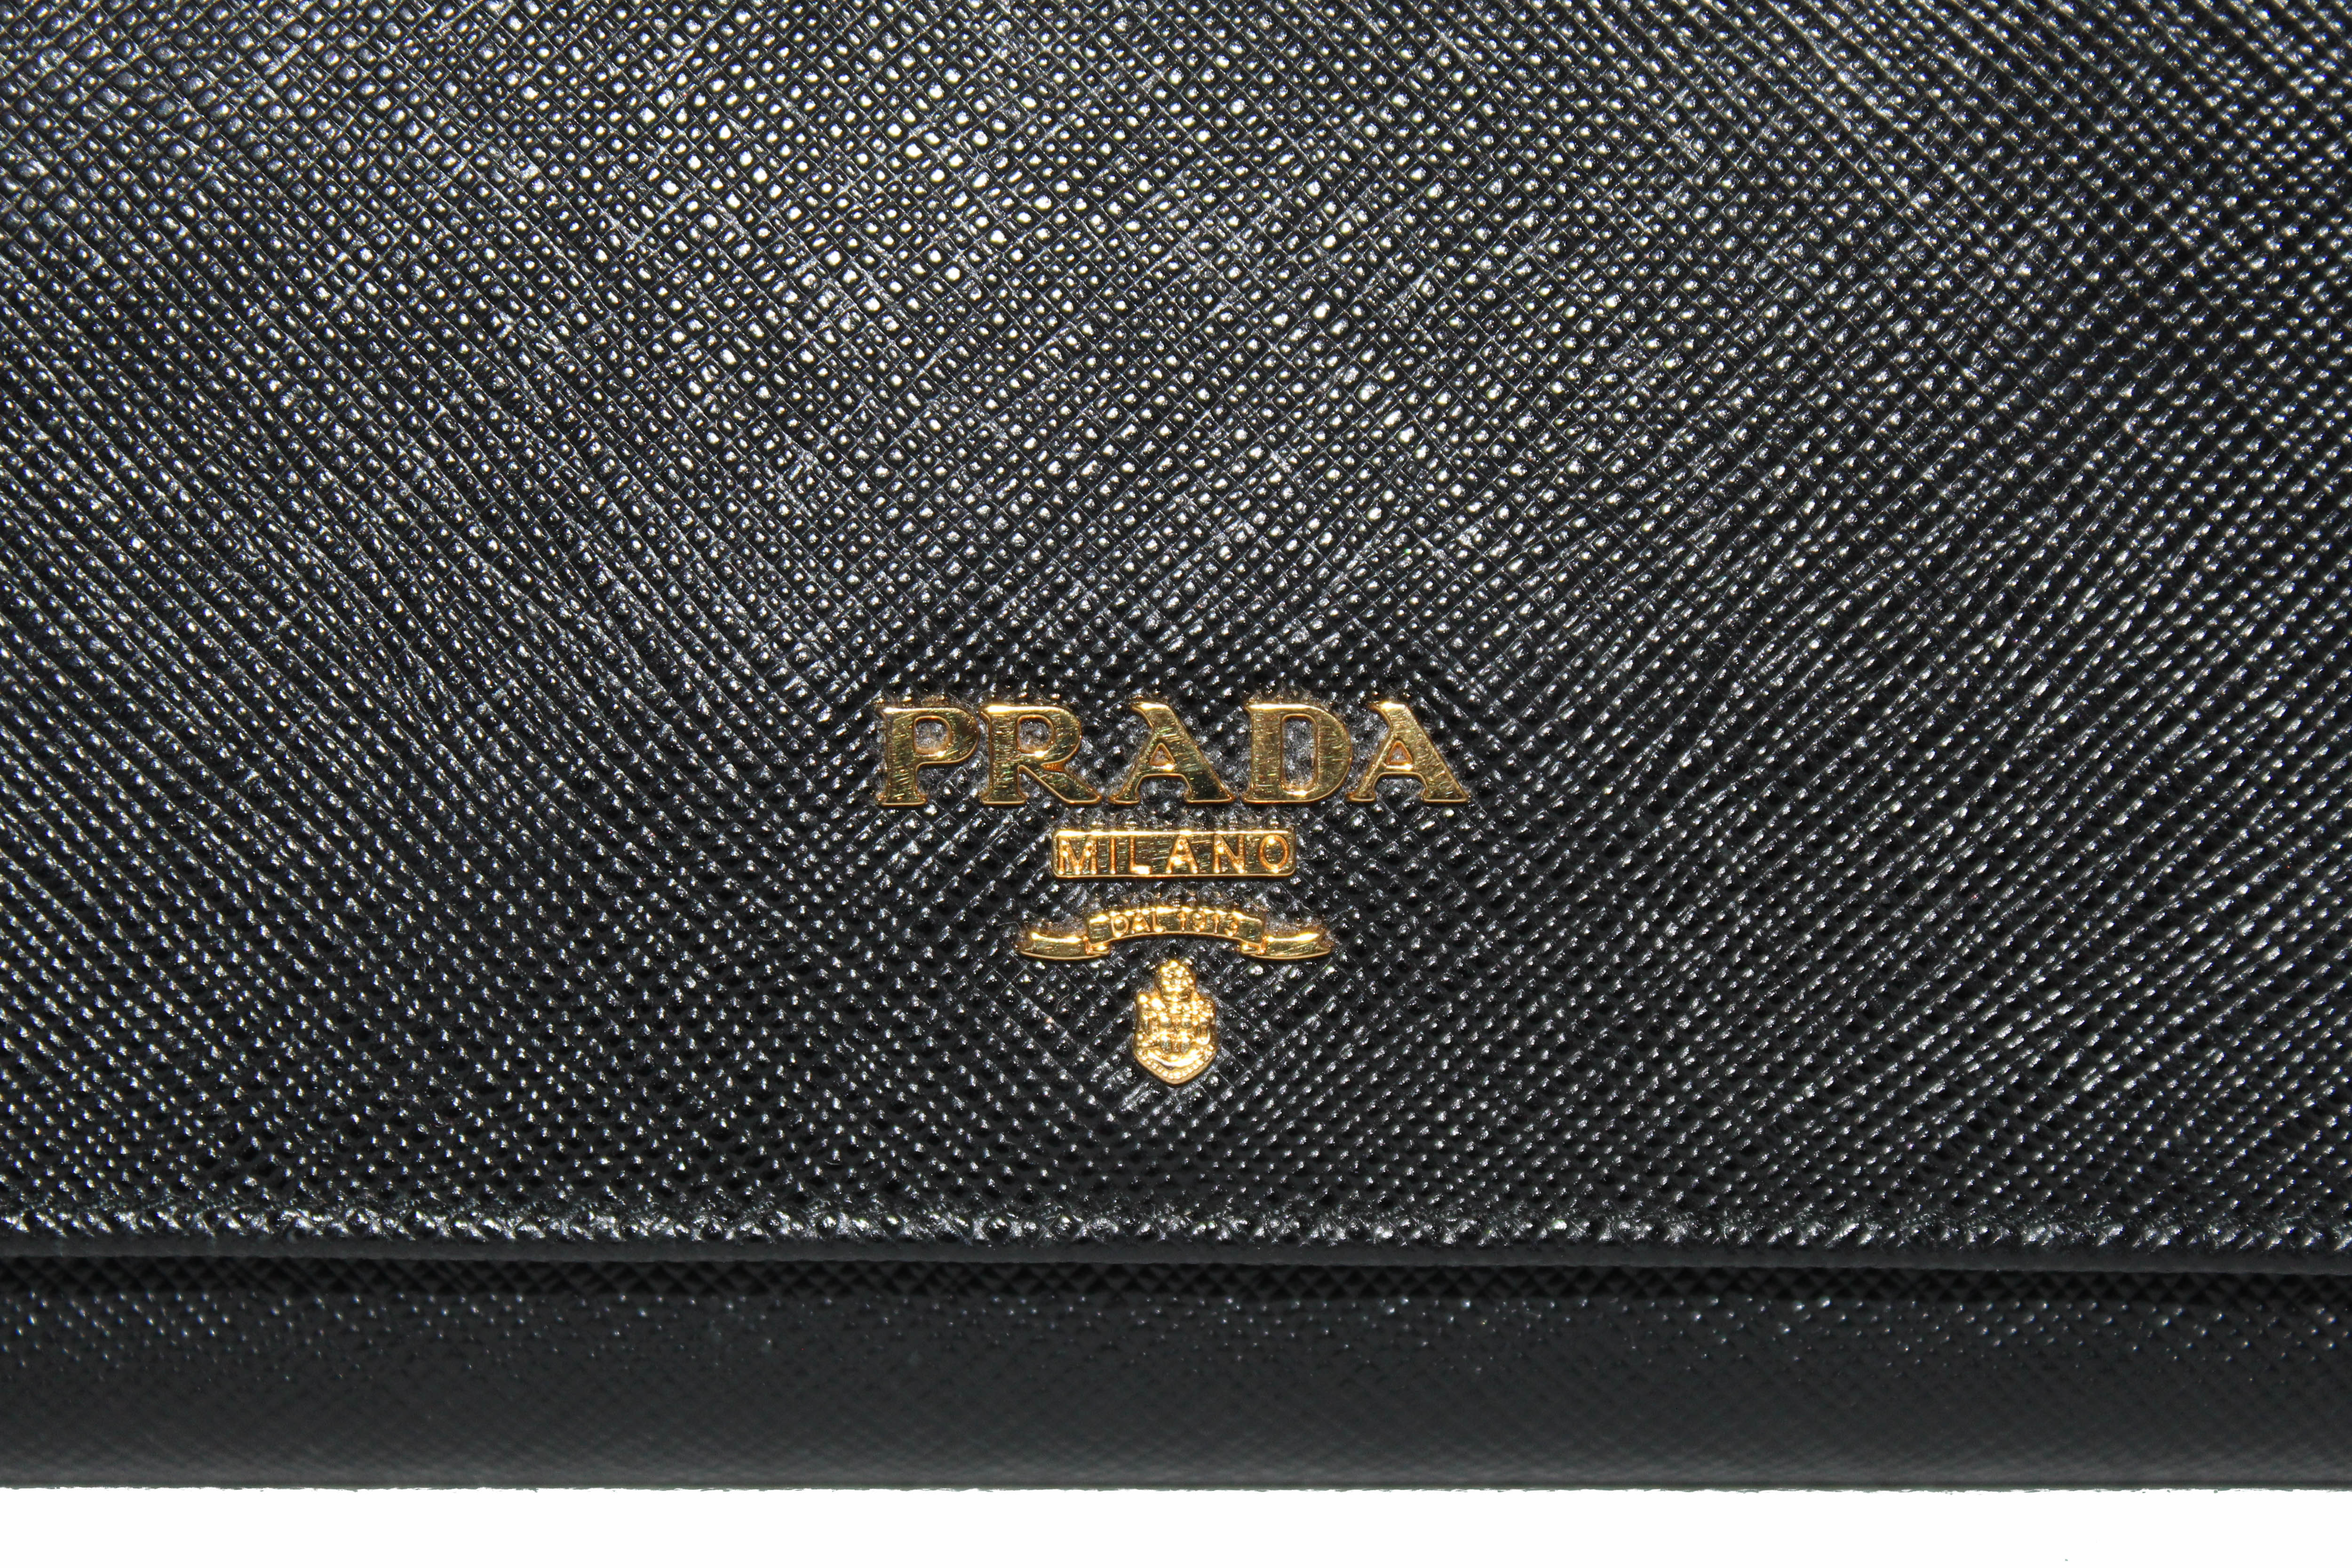 Authentic New Prada Black Saffiano Leather Long Wallet 1MH132